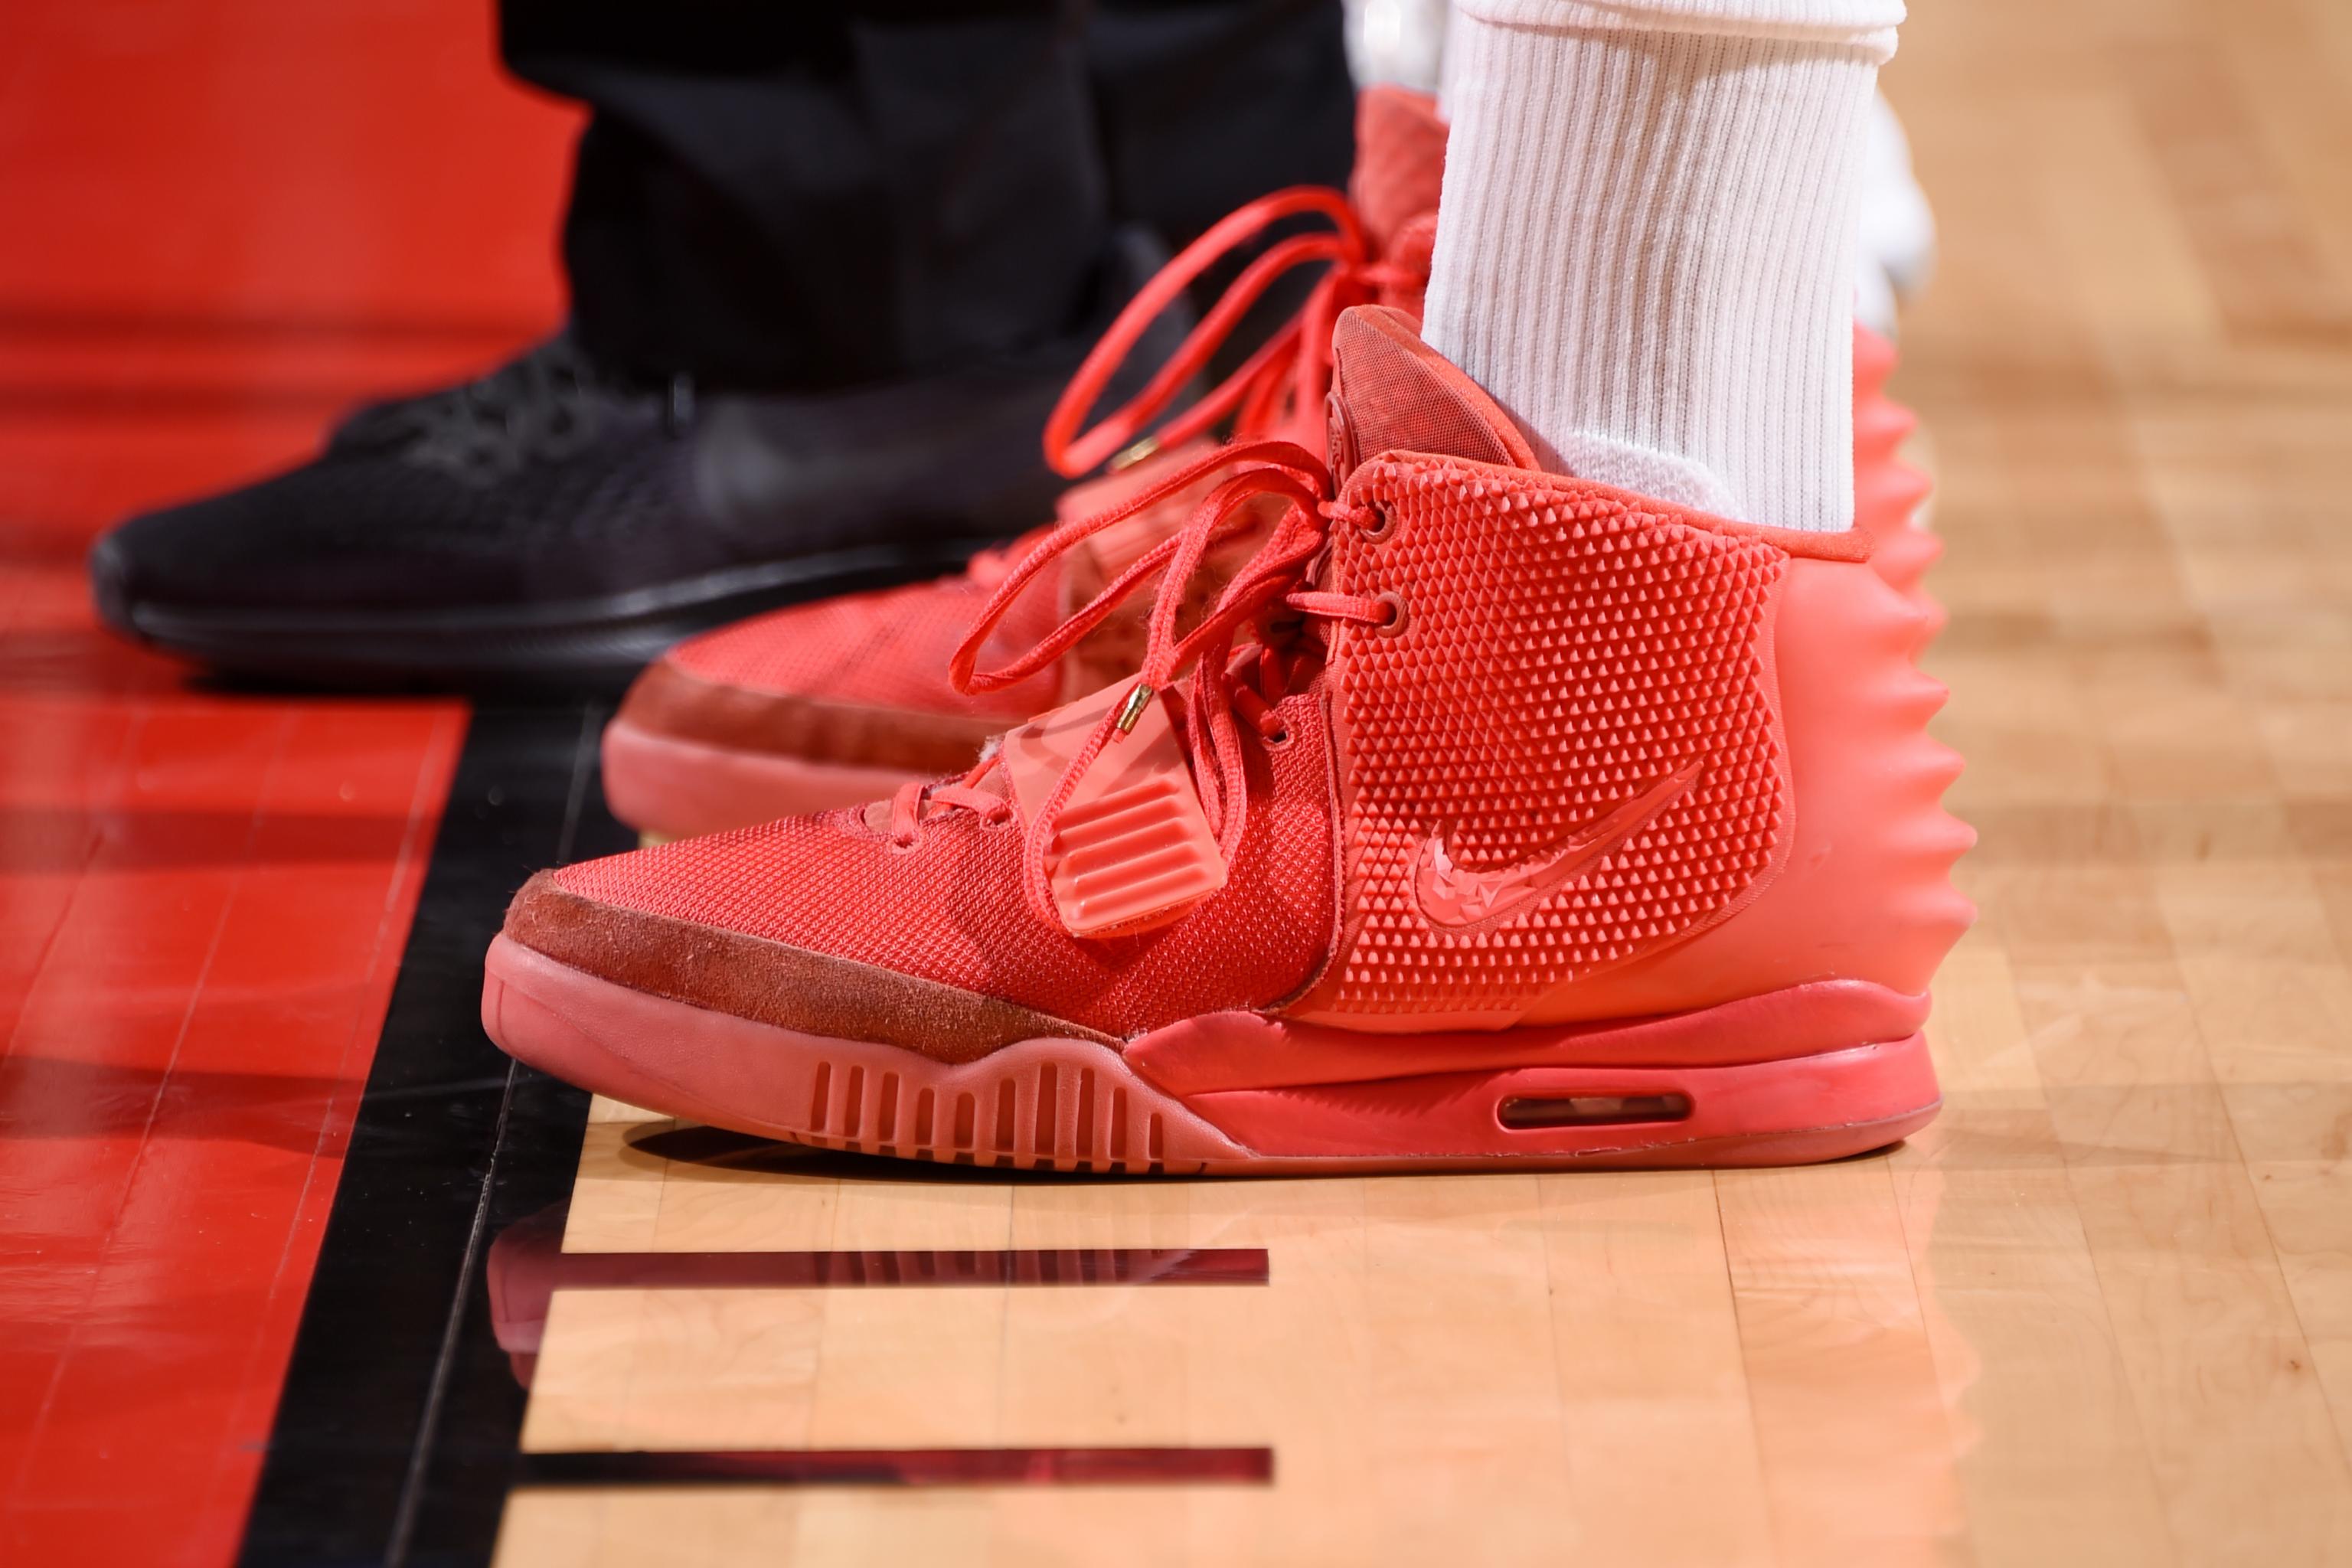 P.J. Tucker is NOT The Sneaker King He's Much More